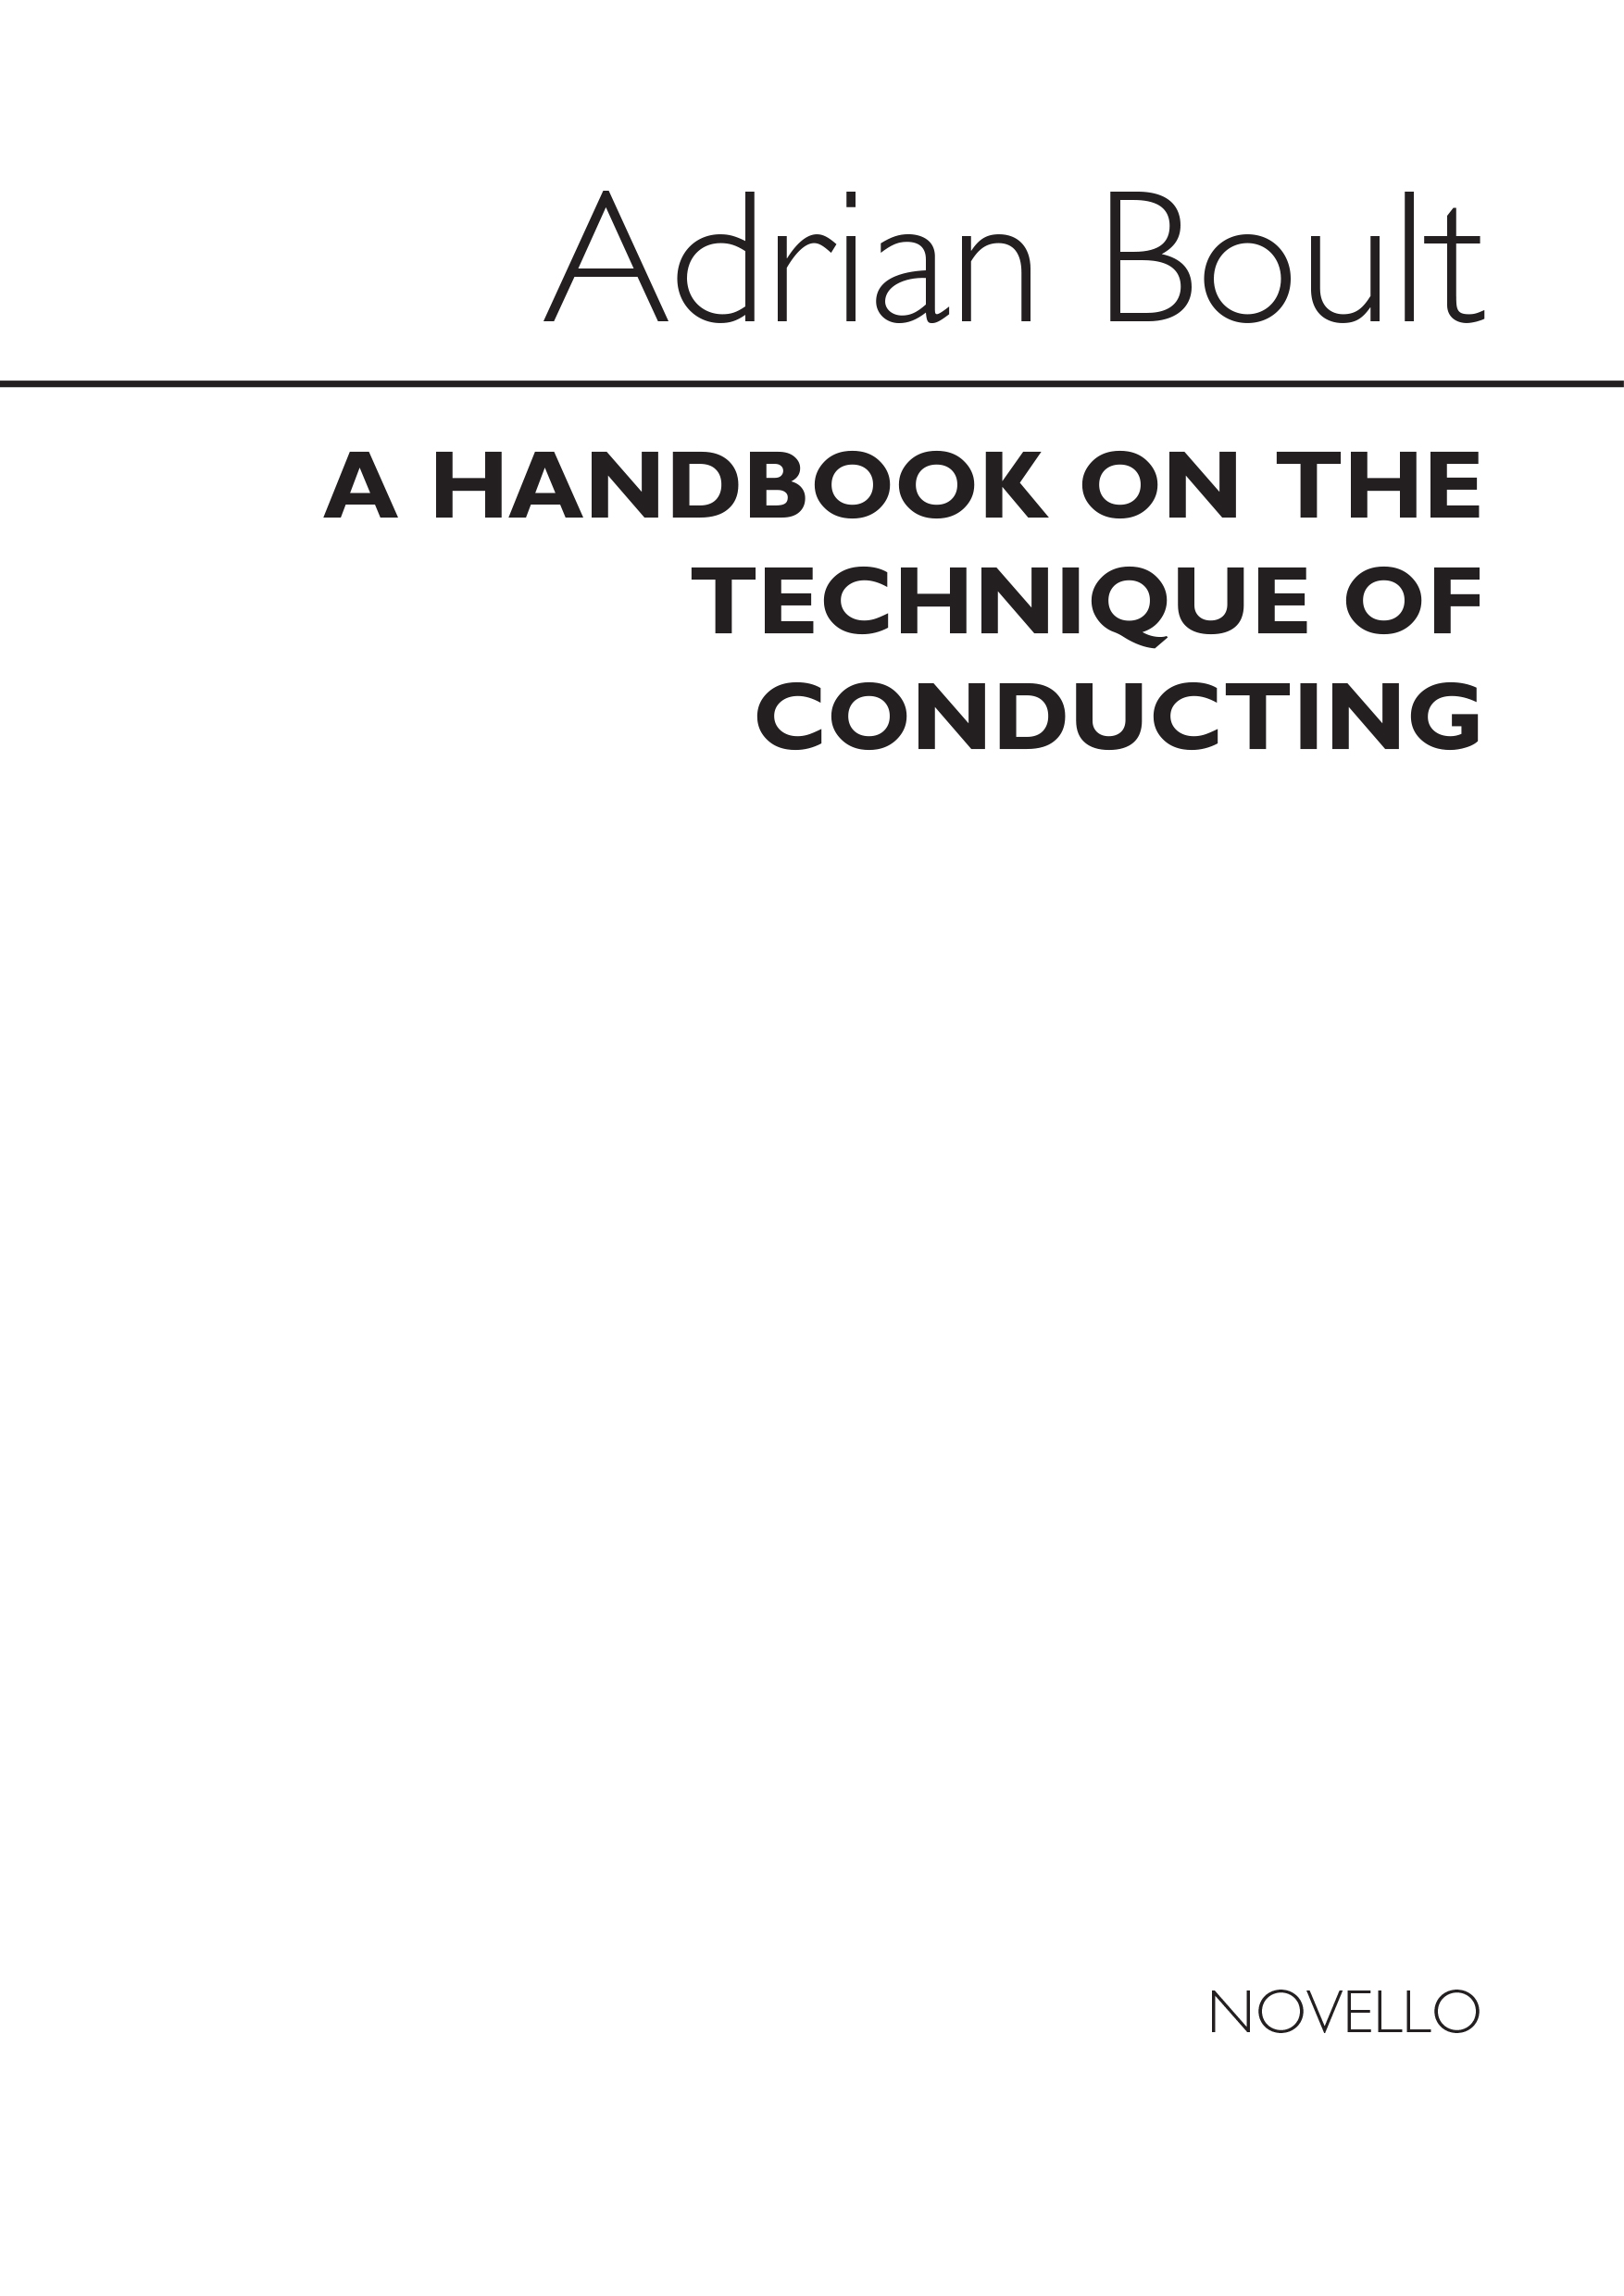 Sir Adrian Boult: A Handbook On The Technique Of Conducting: Reference